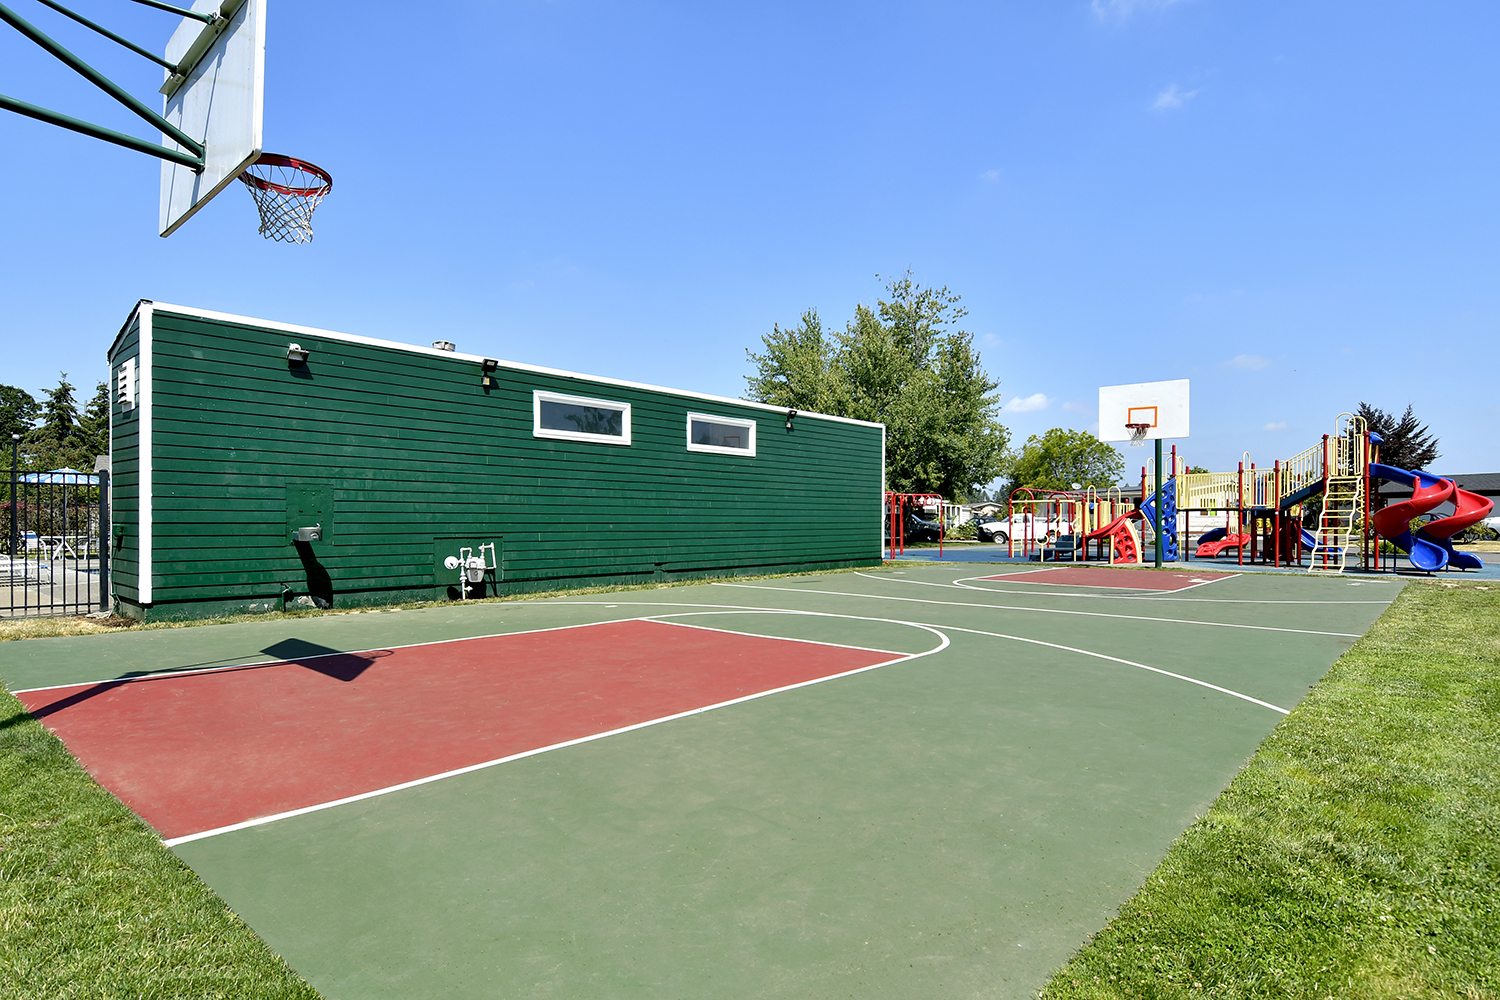 Large outdoor basketball court next to playground.